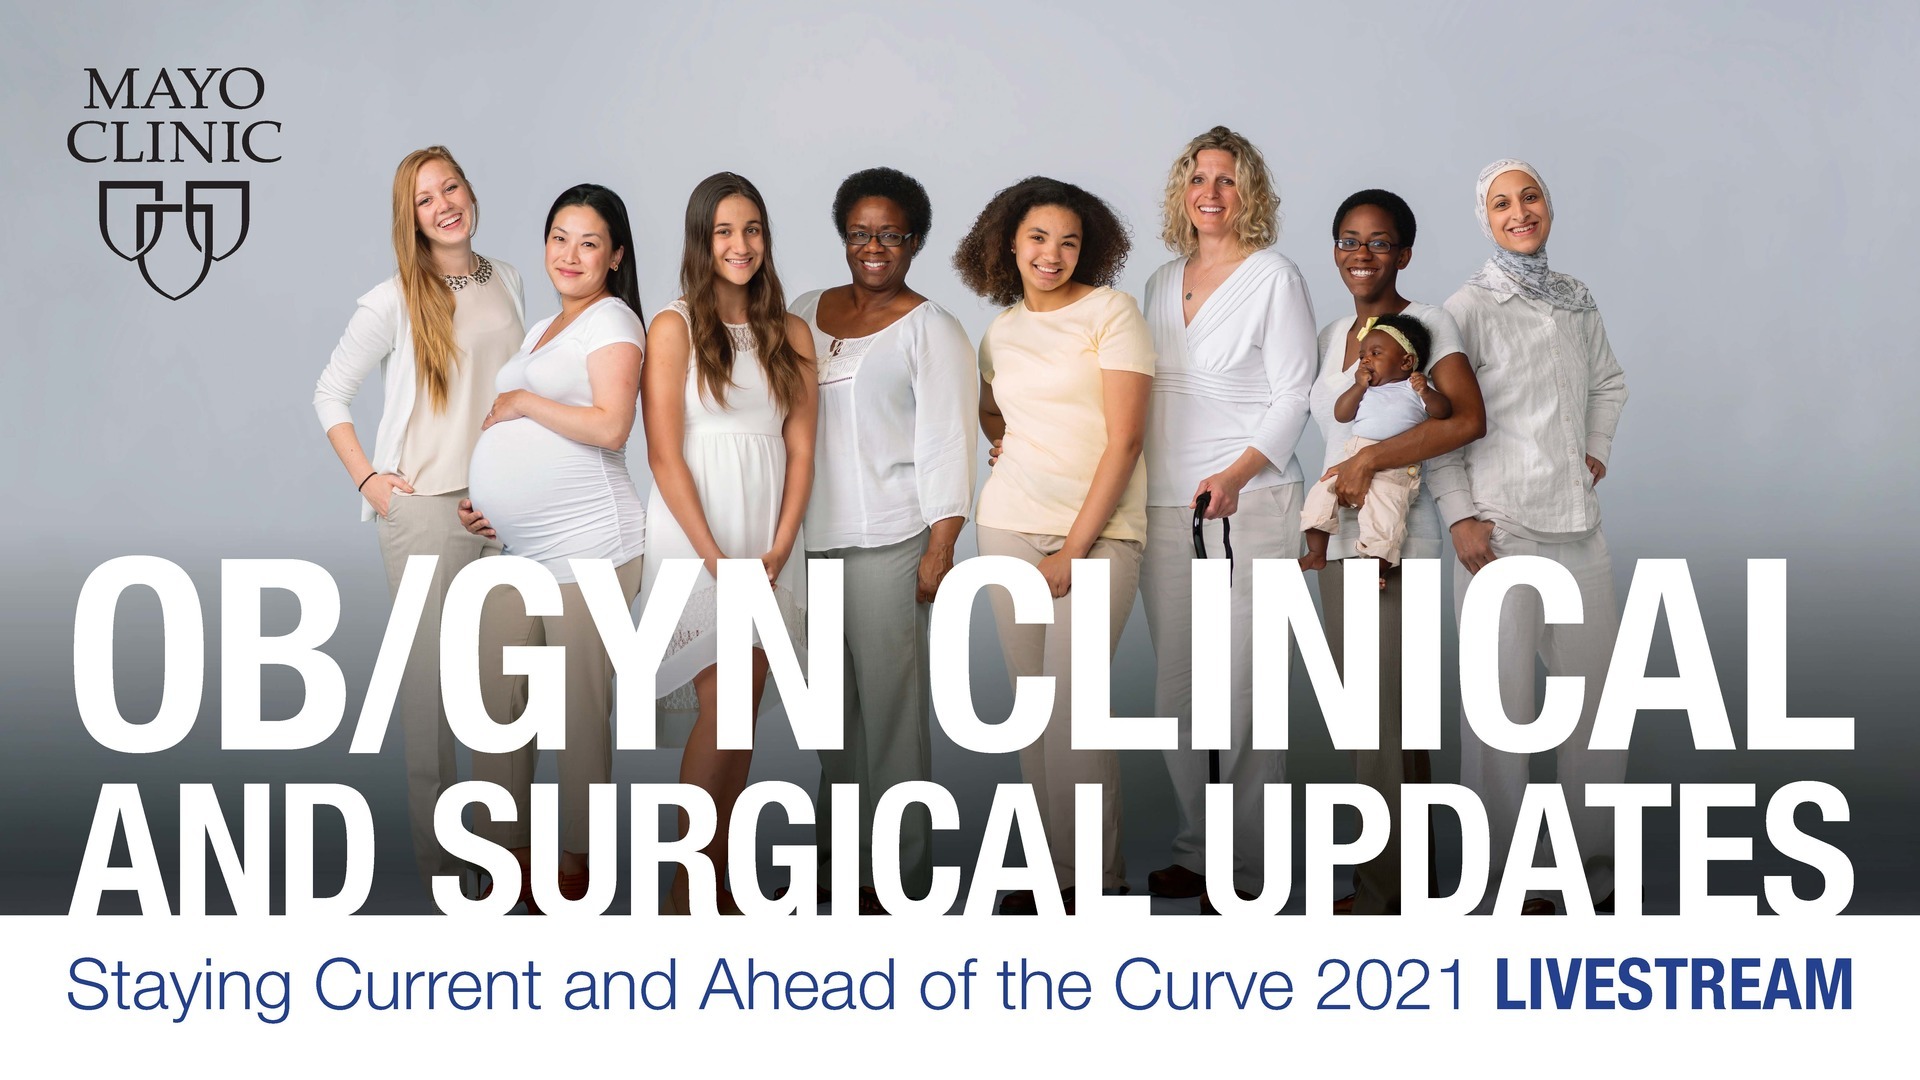 Mayo Clinic OB/GYN Clinical and Surgical Updates: Staying Current and Ahead of the Curve 2021 - LIVE, Virtual, United States